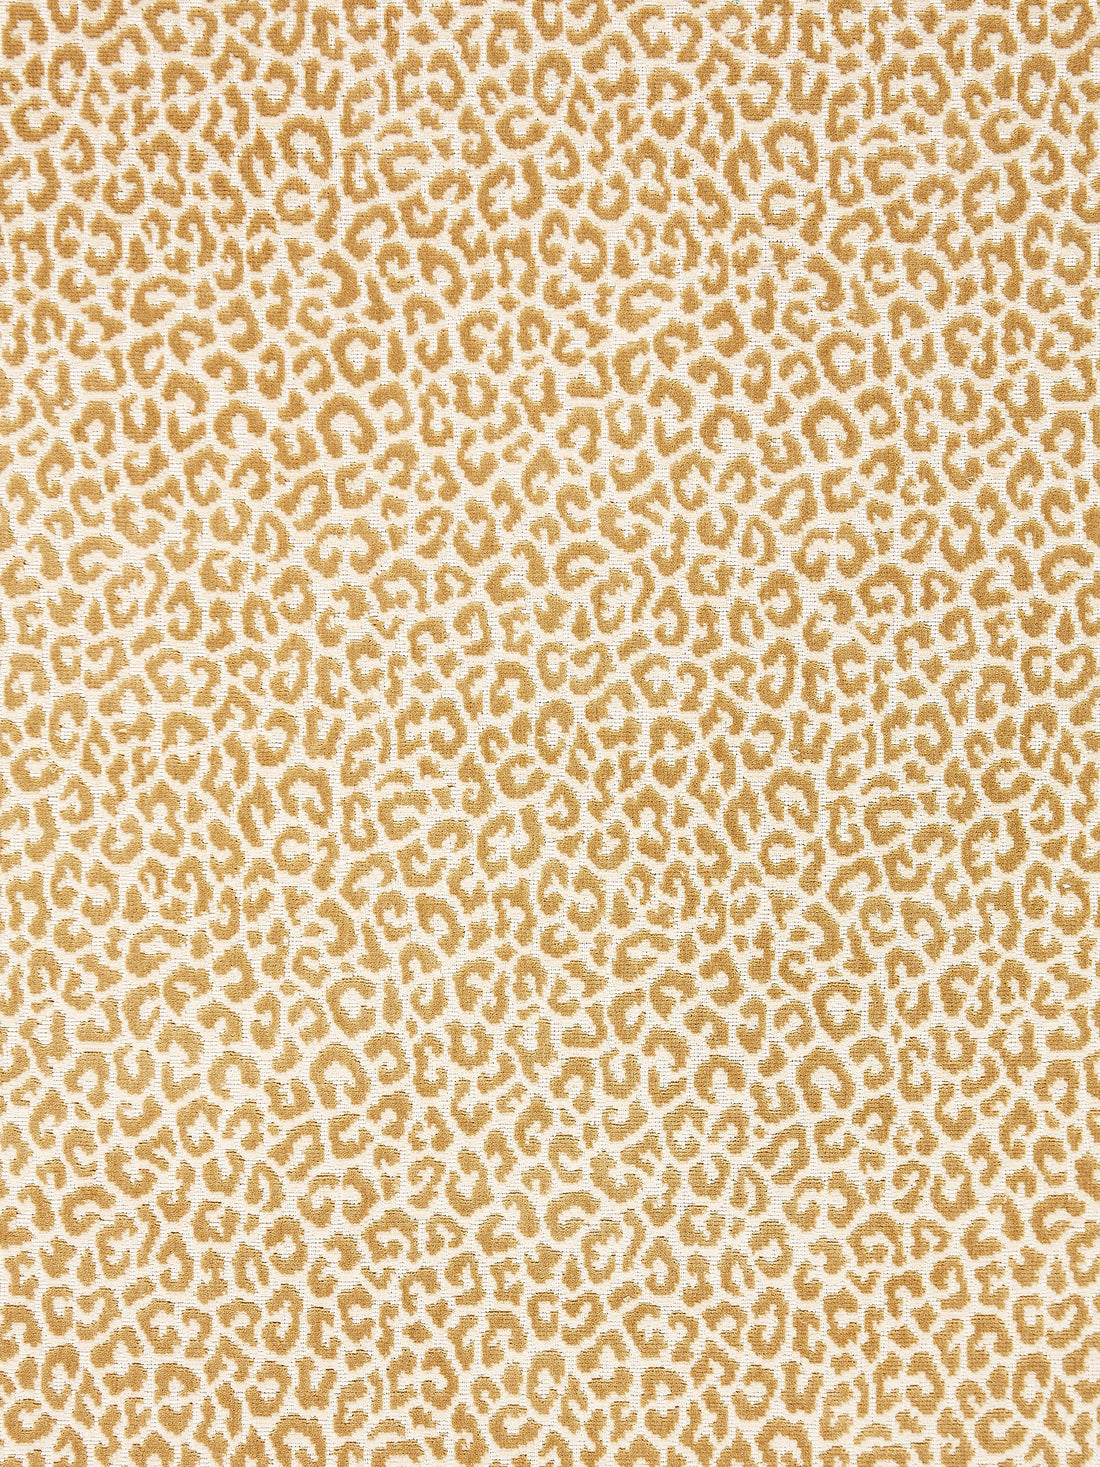 Panthera Velvet fabric in camel color - pattern number SC 000127037 - by Scalamandre in the Scalamandre Fabrics Book 1 collection